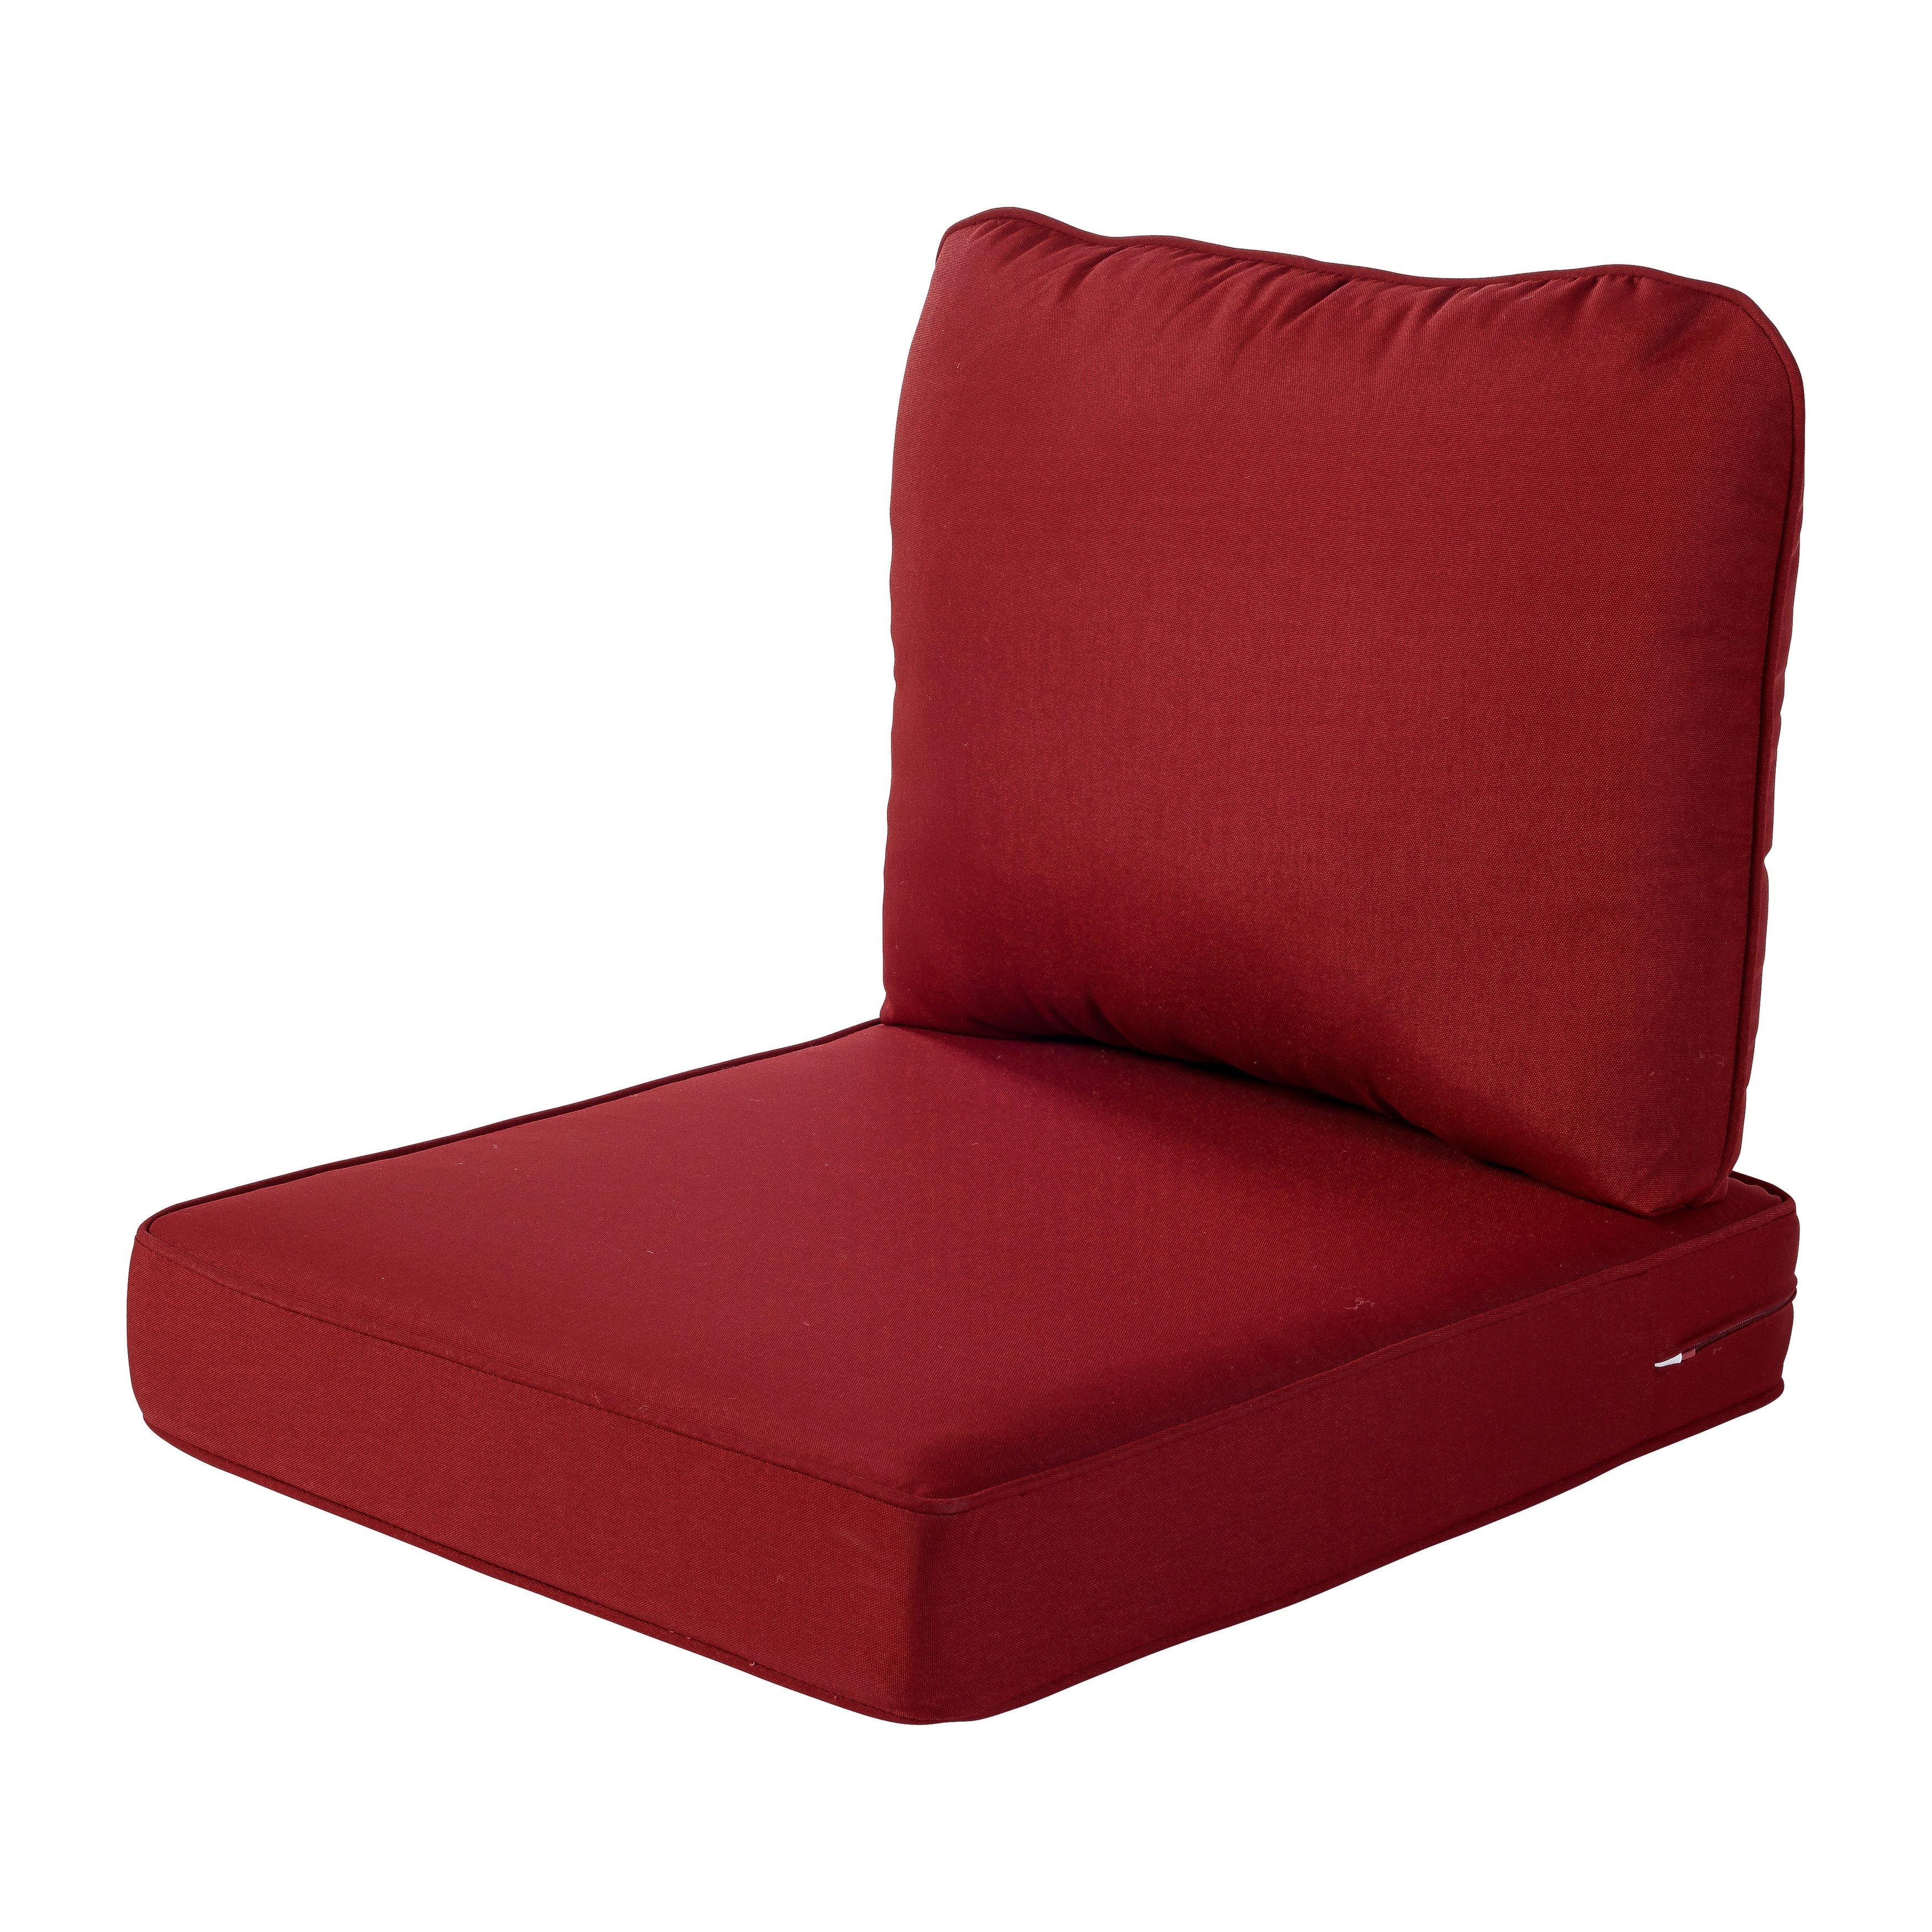 https://ak1.ostkcdn.com/images/products/is/images/direct/a21c2b2a19a71e63c9e67c069080d86b10423f22/Haven-Way-Outdoor-Seat-%26-Back-Cushion-Set.jpg